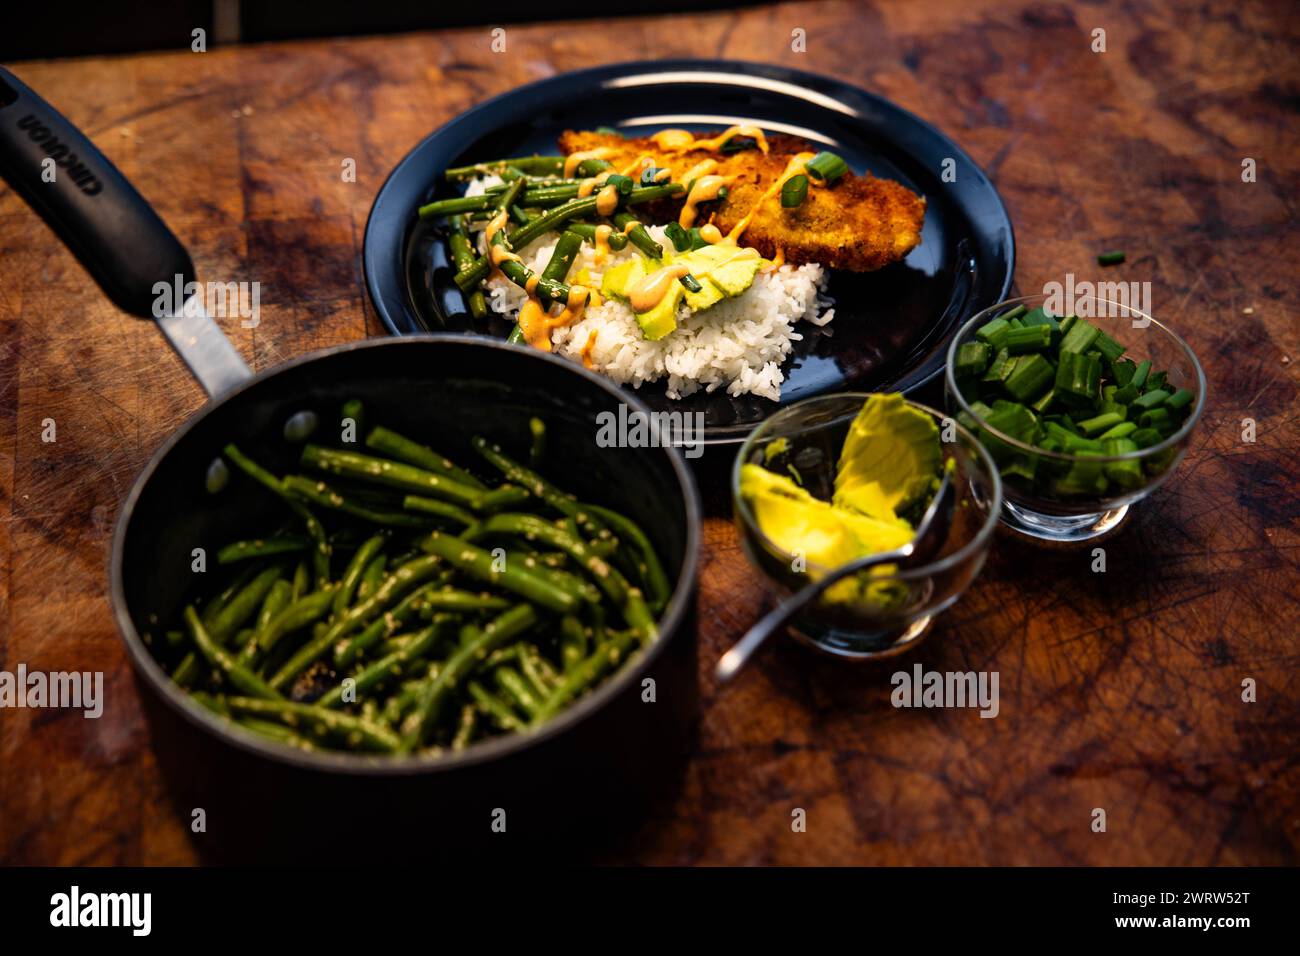 A plate of assorted meats, rice, and green beans Stock Photo